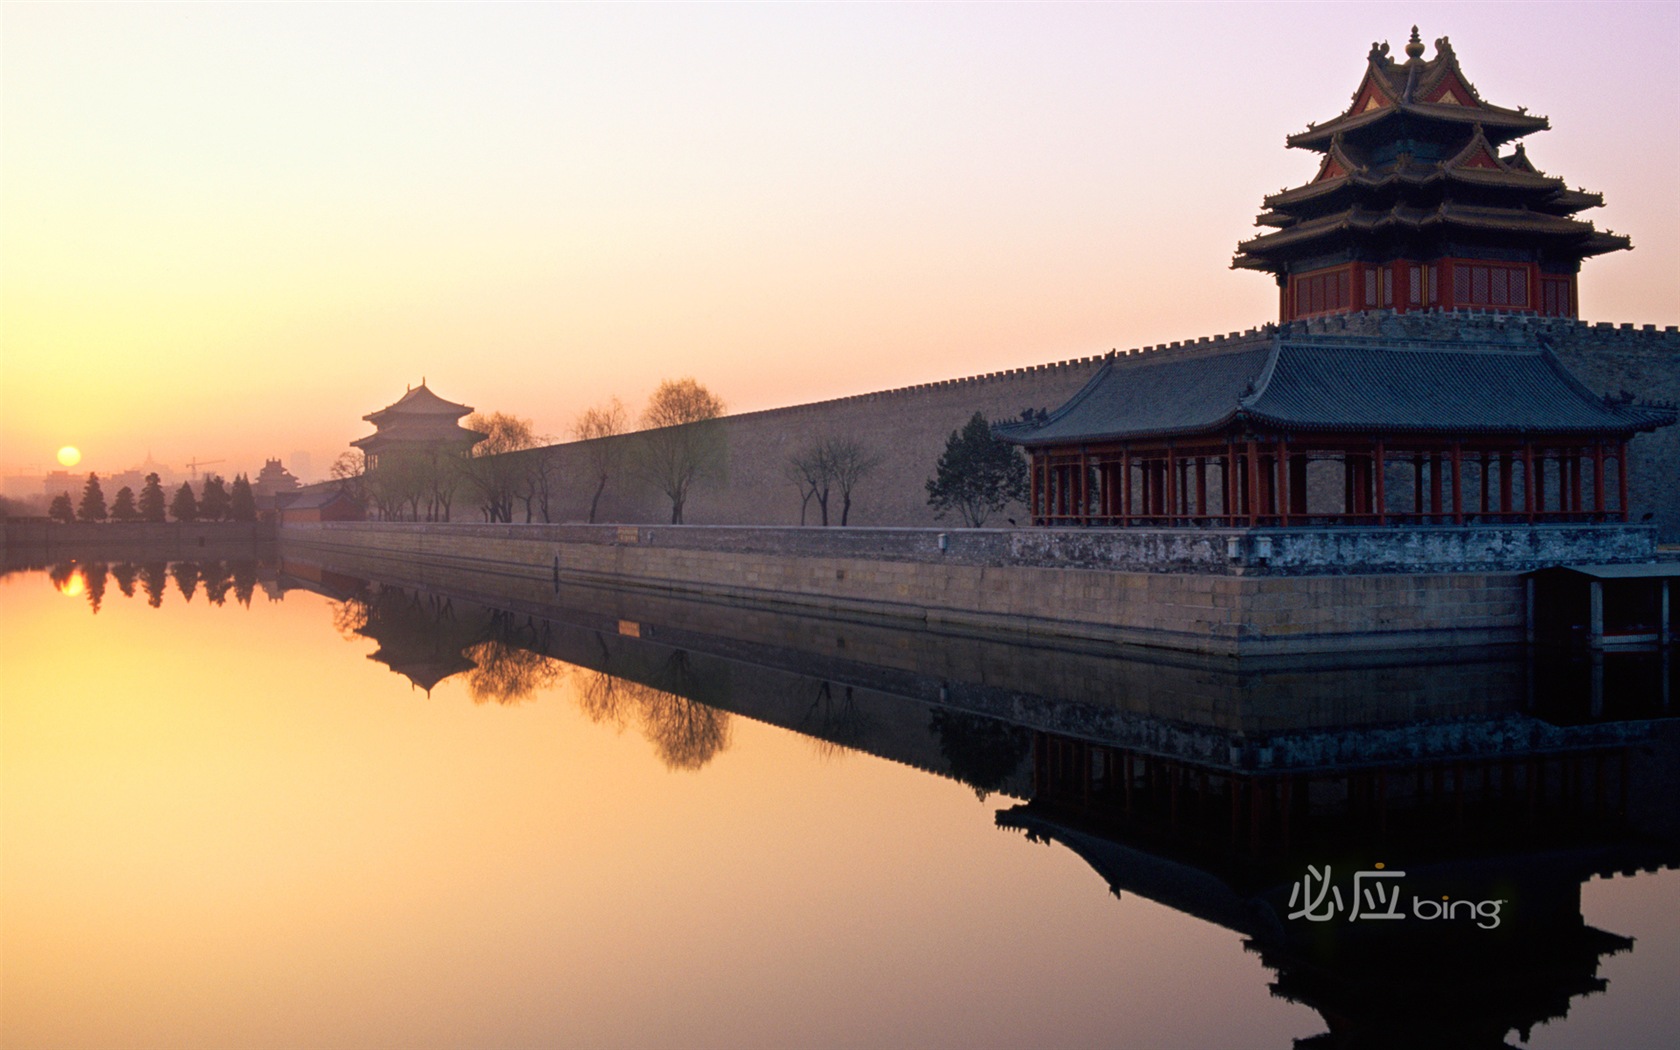 Bing selection best HD wallpapers: China theme wallpaper (2) #5 - 1680x1050